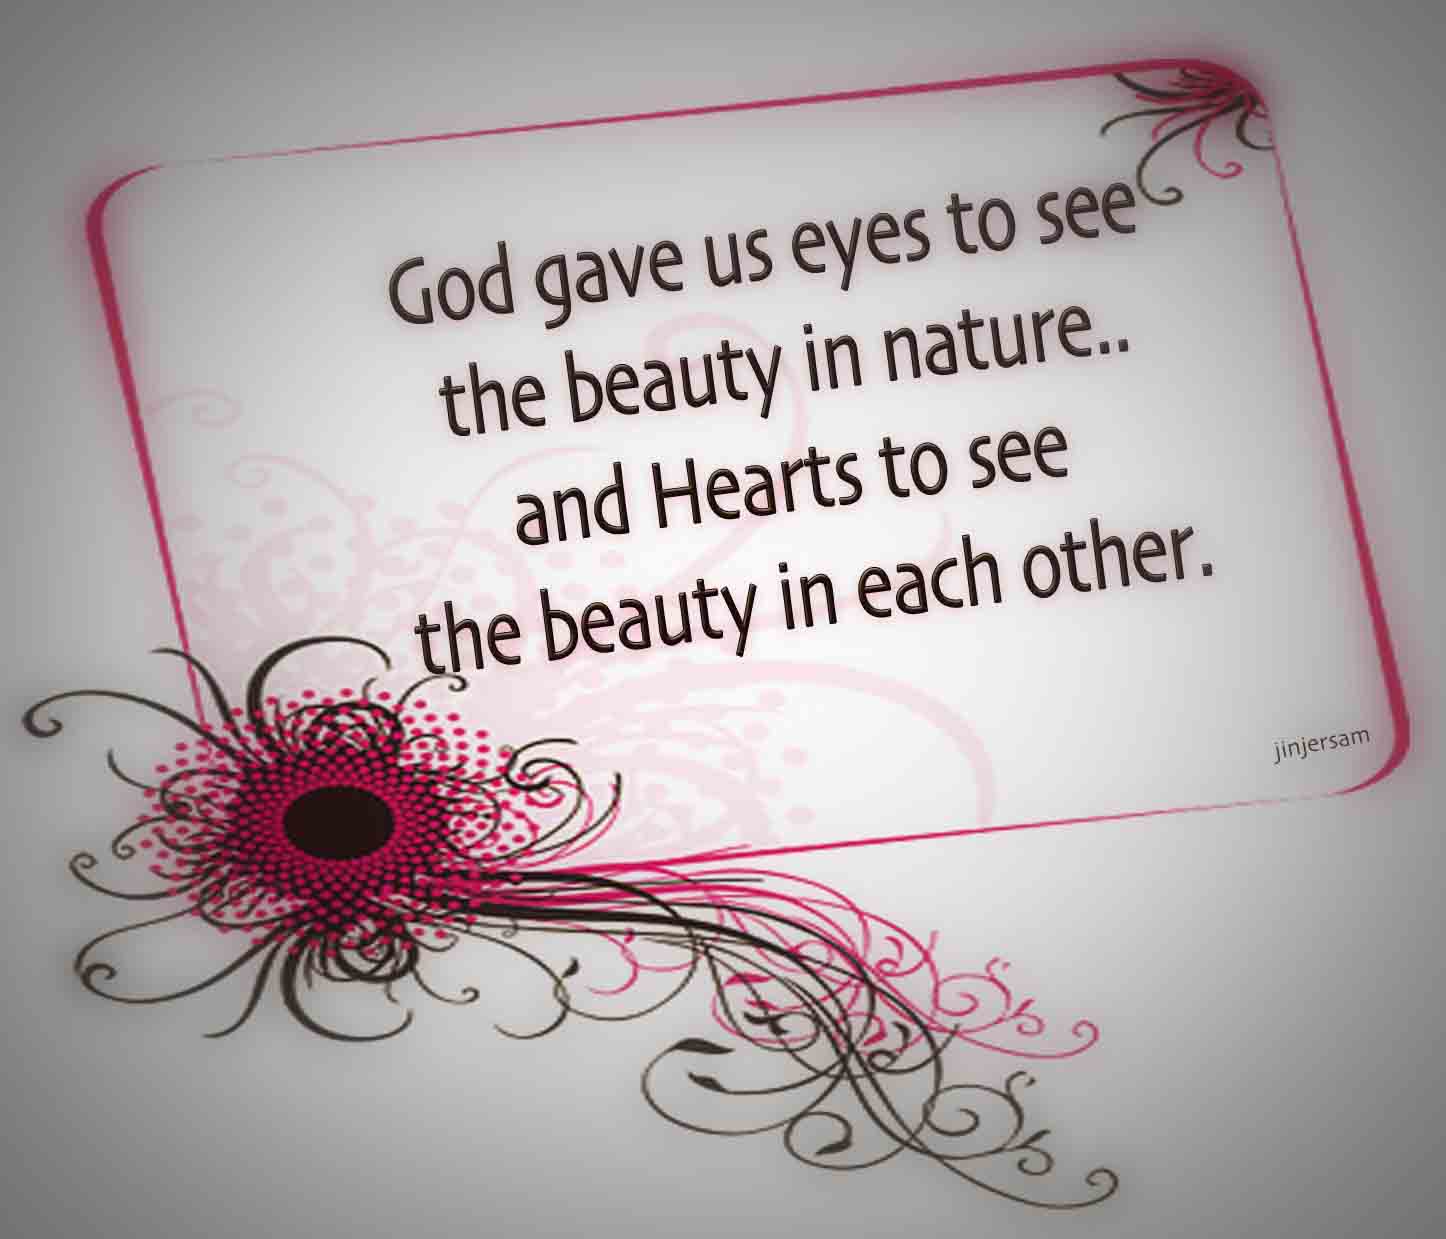 God gave us eyes to see the beauty in nature...and hearts to see the beauty in each other.